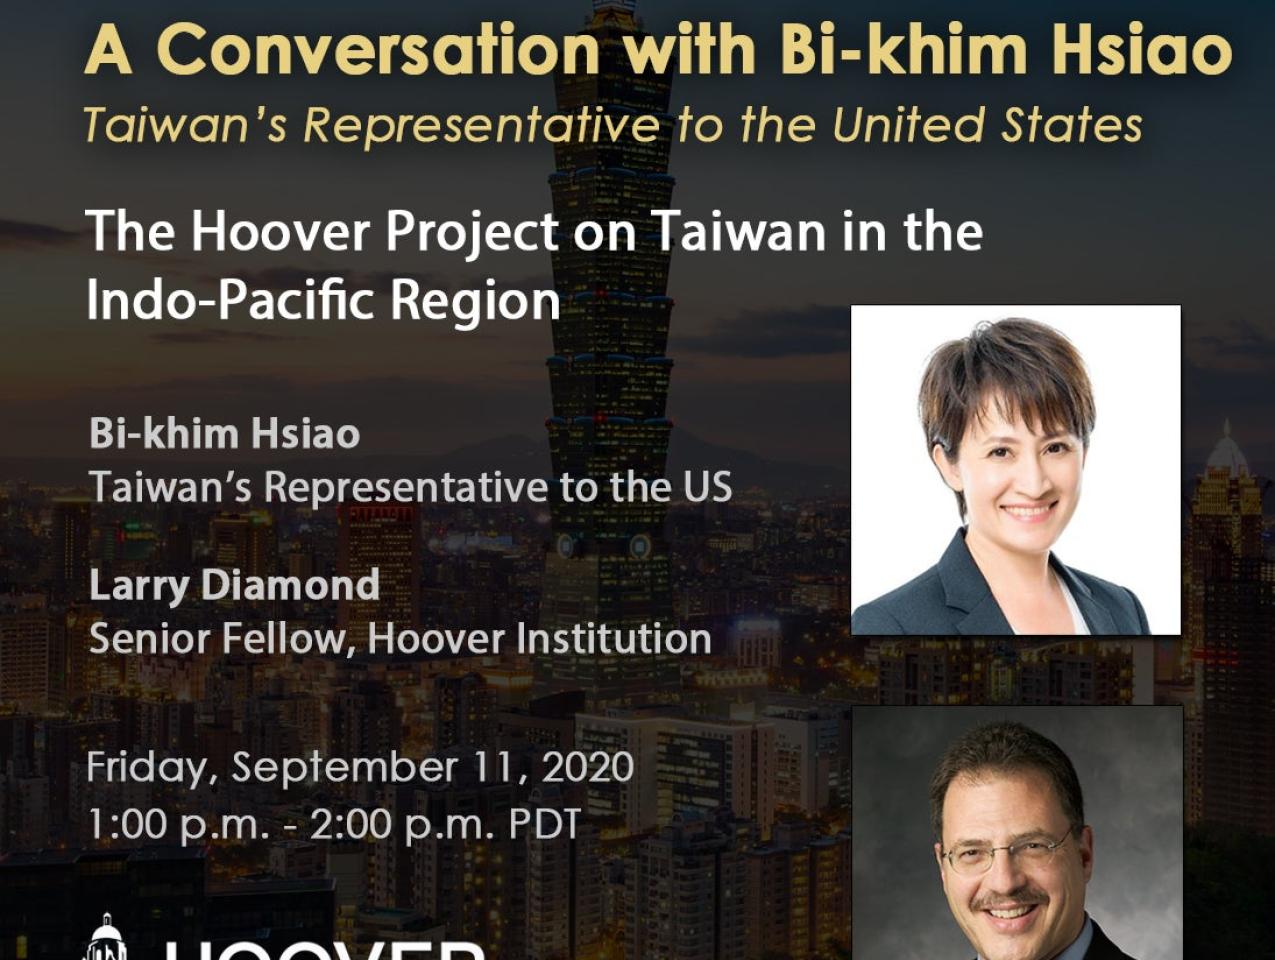 Image for A Conversation With Representative Bi-khim Hsiao